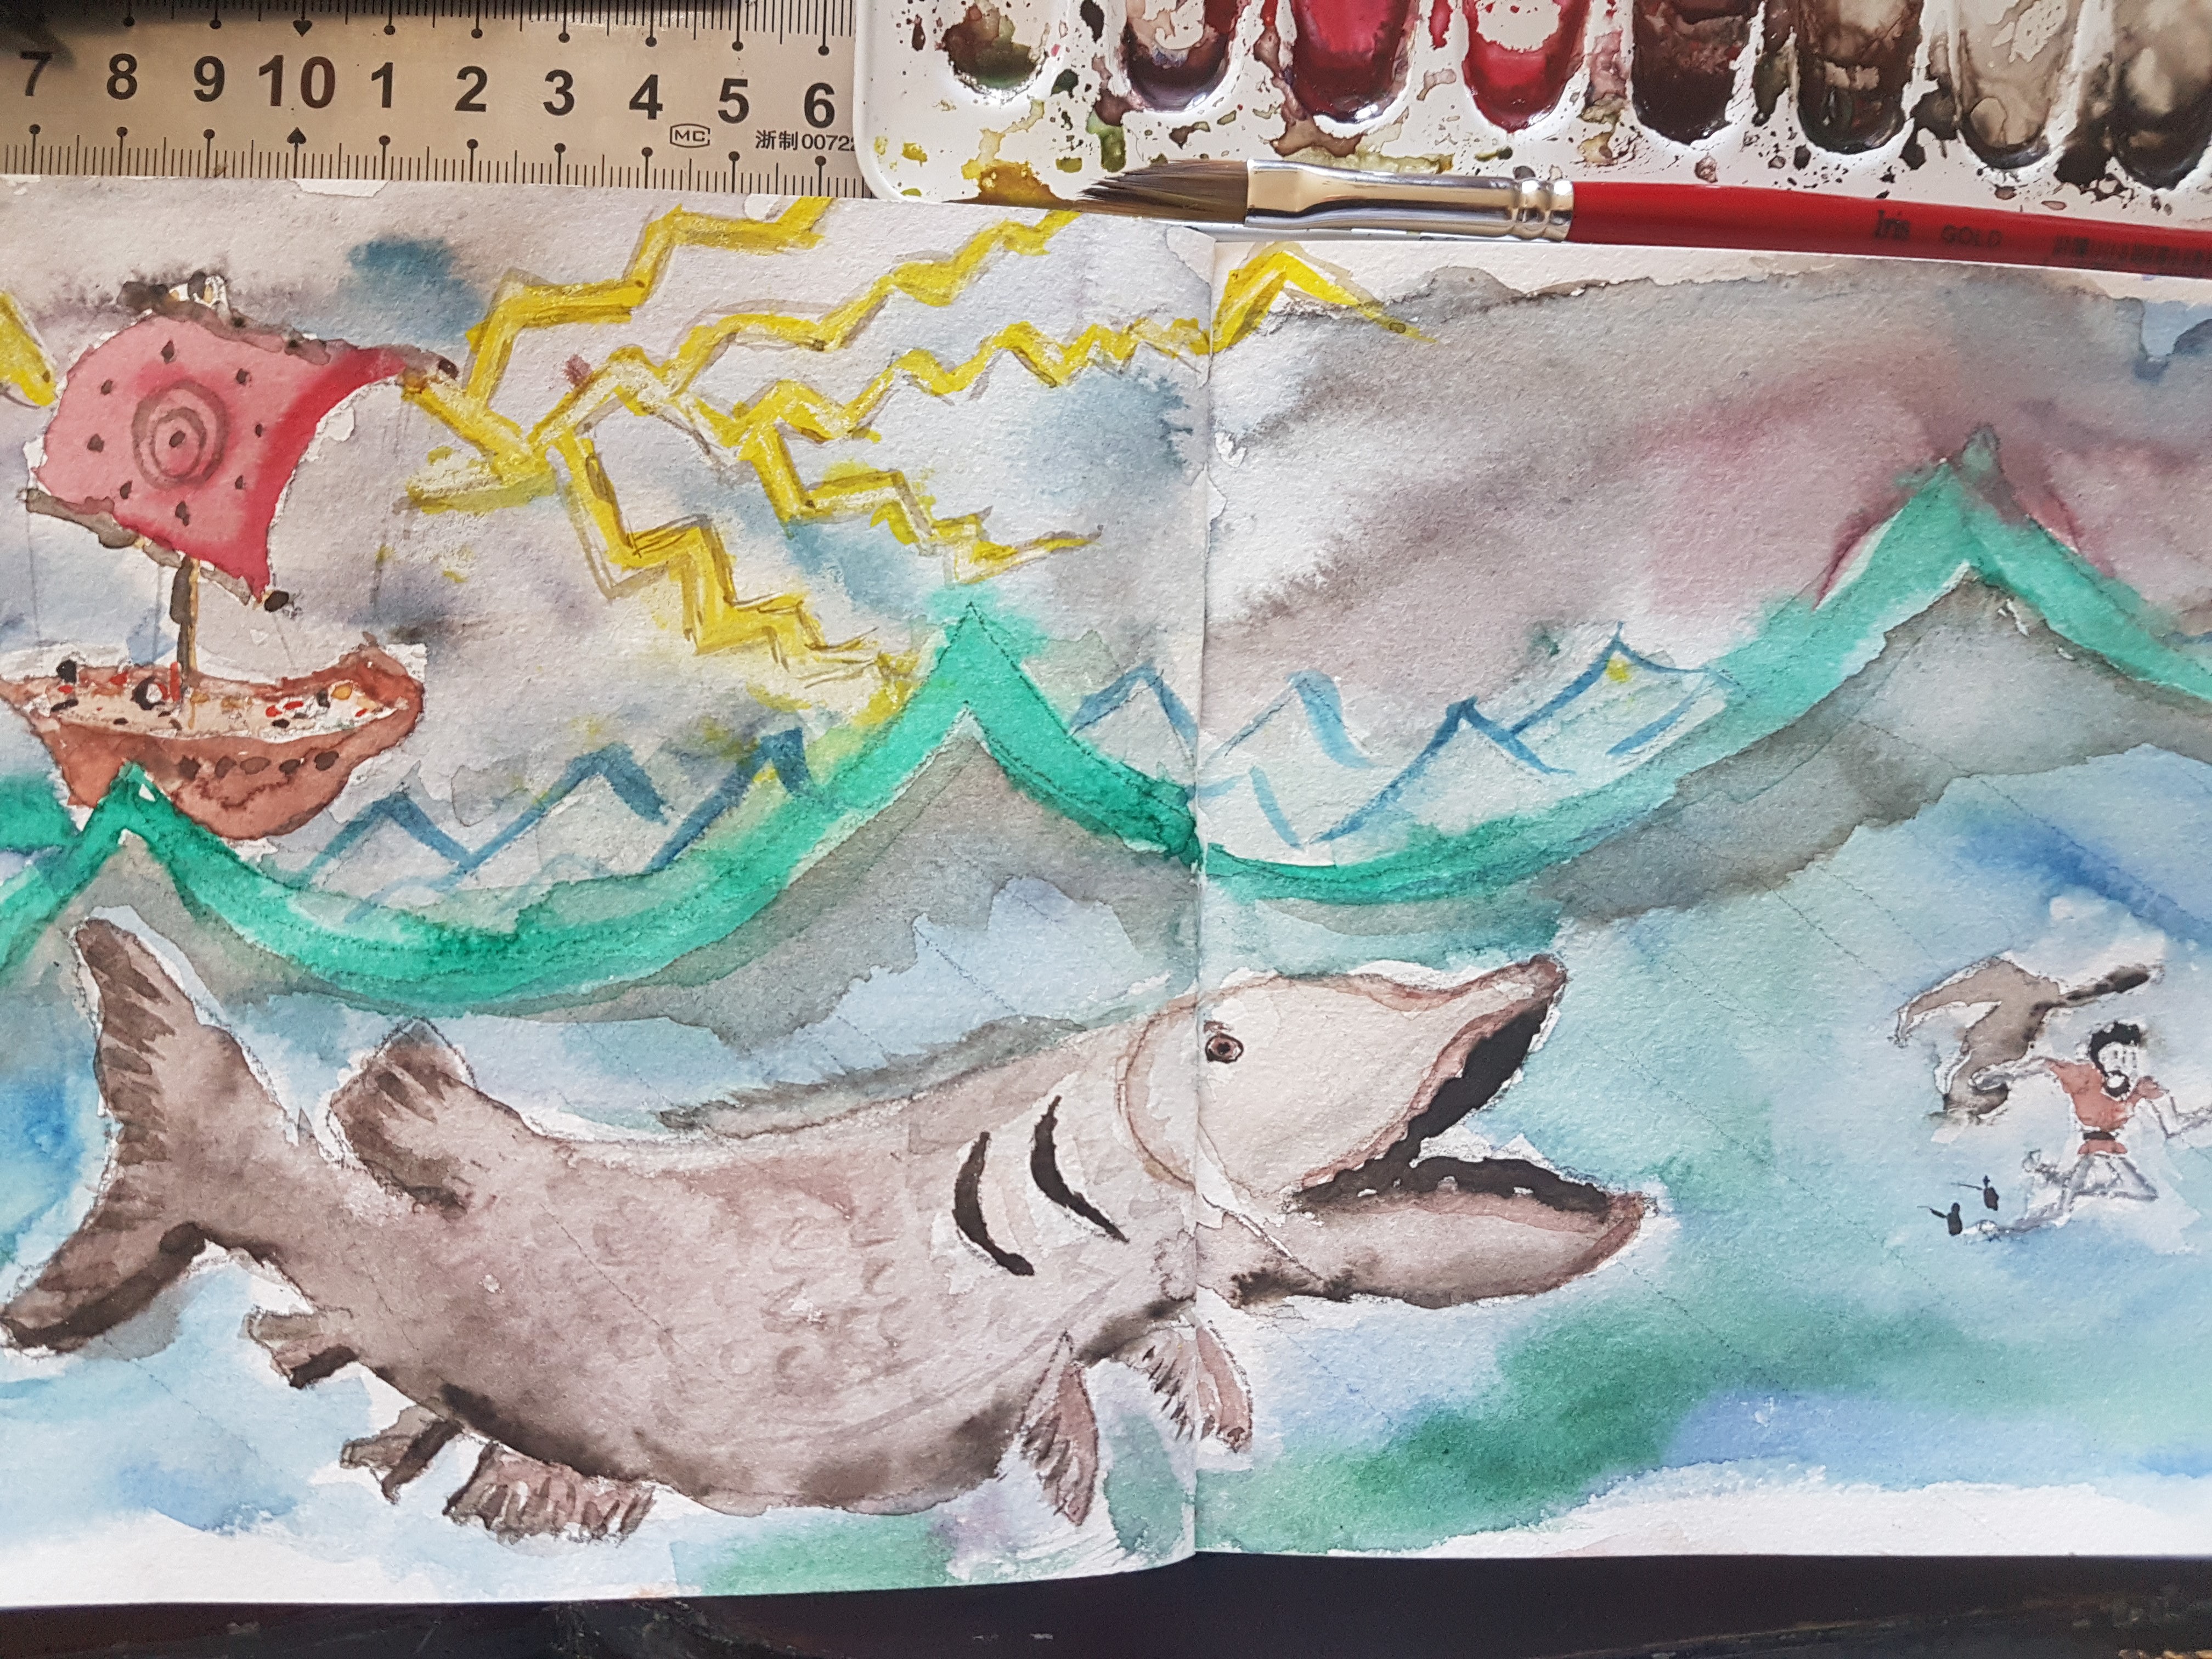 Sketchbook: ‘Jonah and the big fish.’ Ink & watercolours. April 2020. Credit: Author.